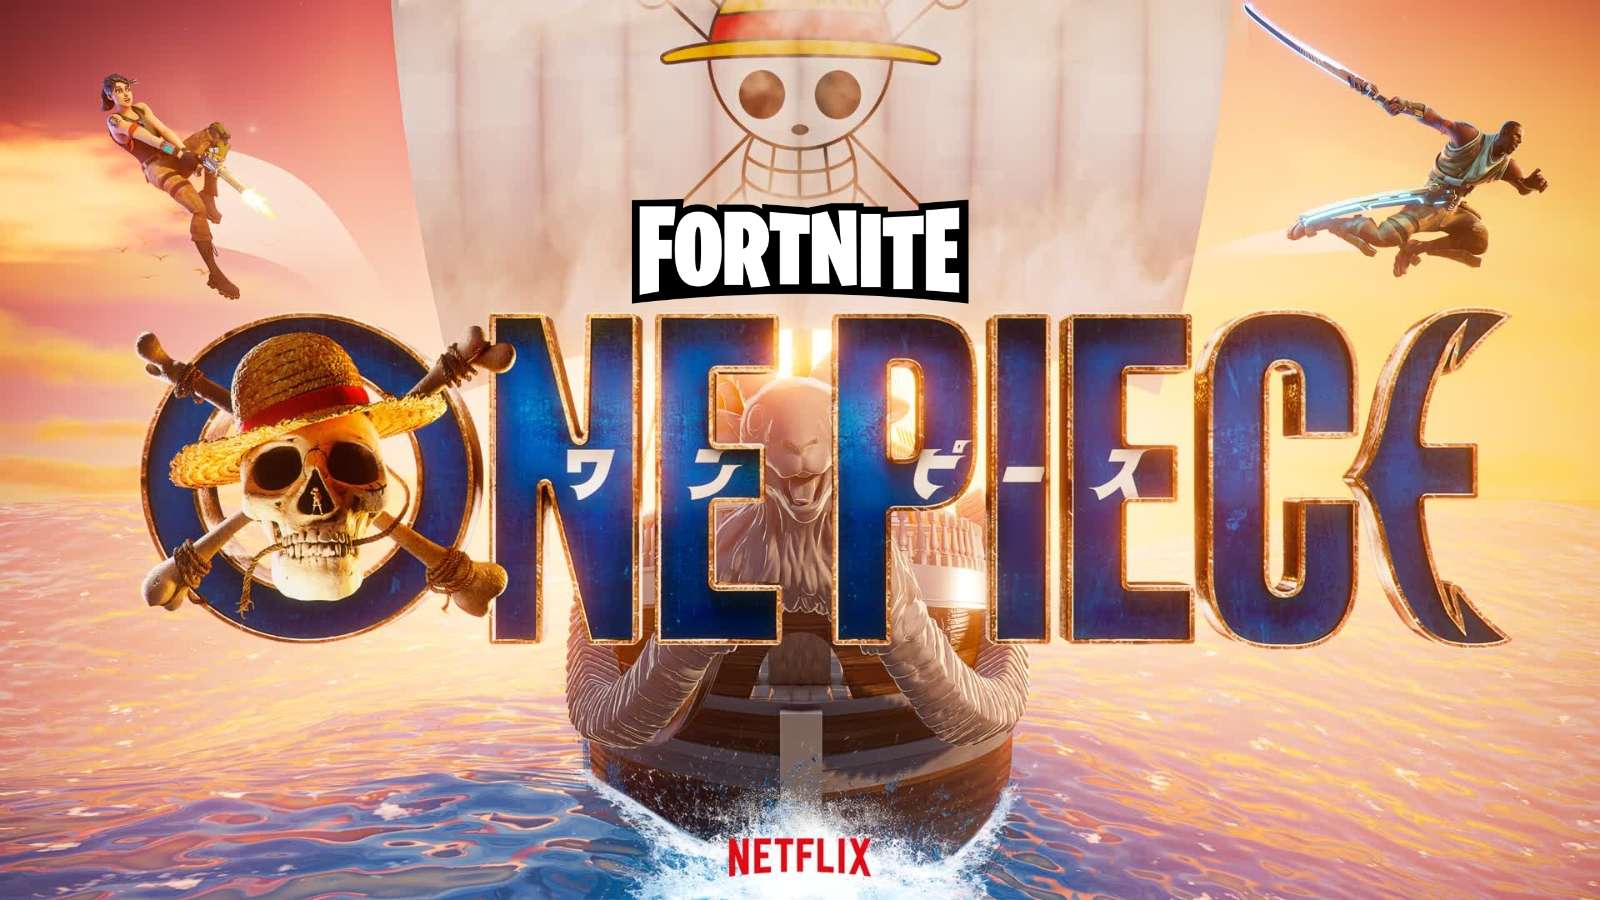 Fortnite One Piece collab